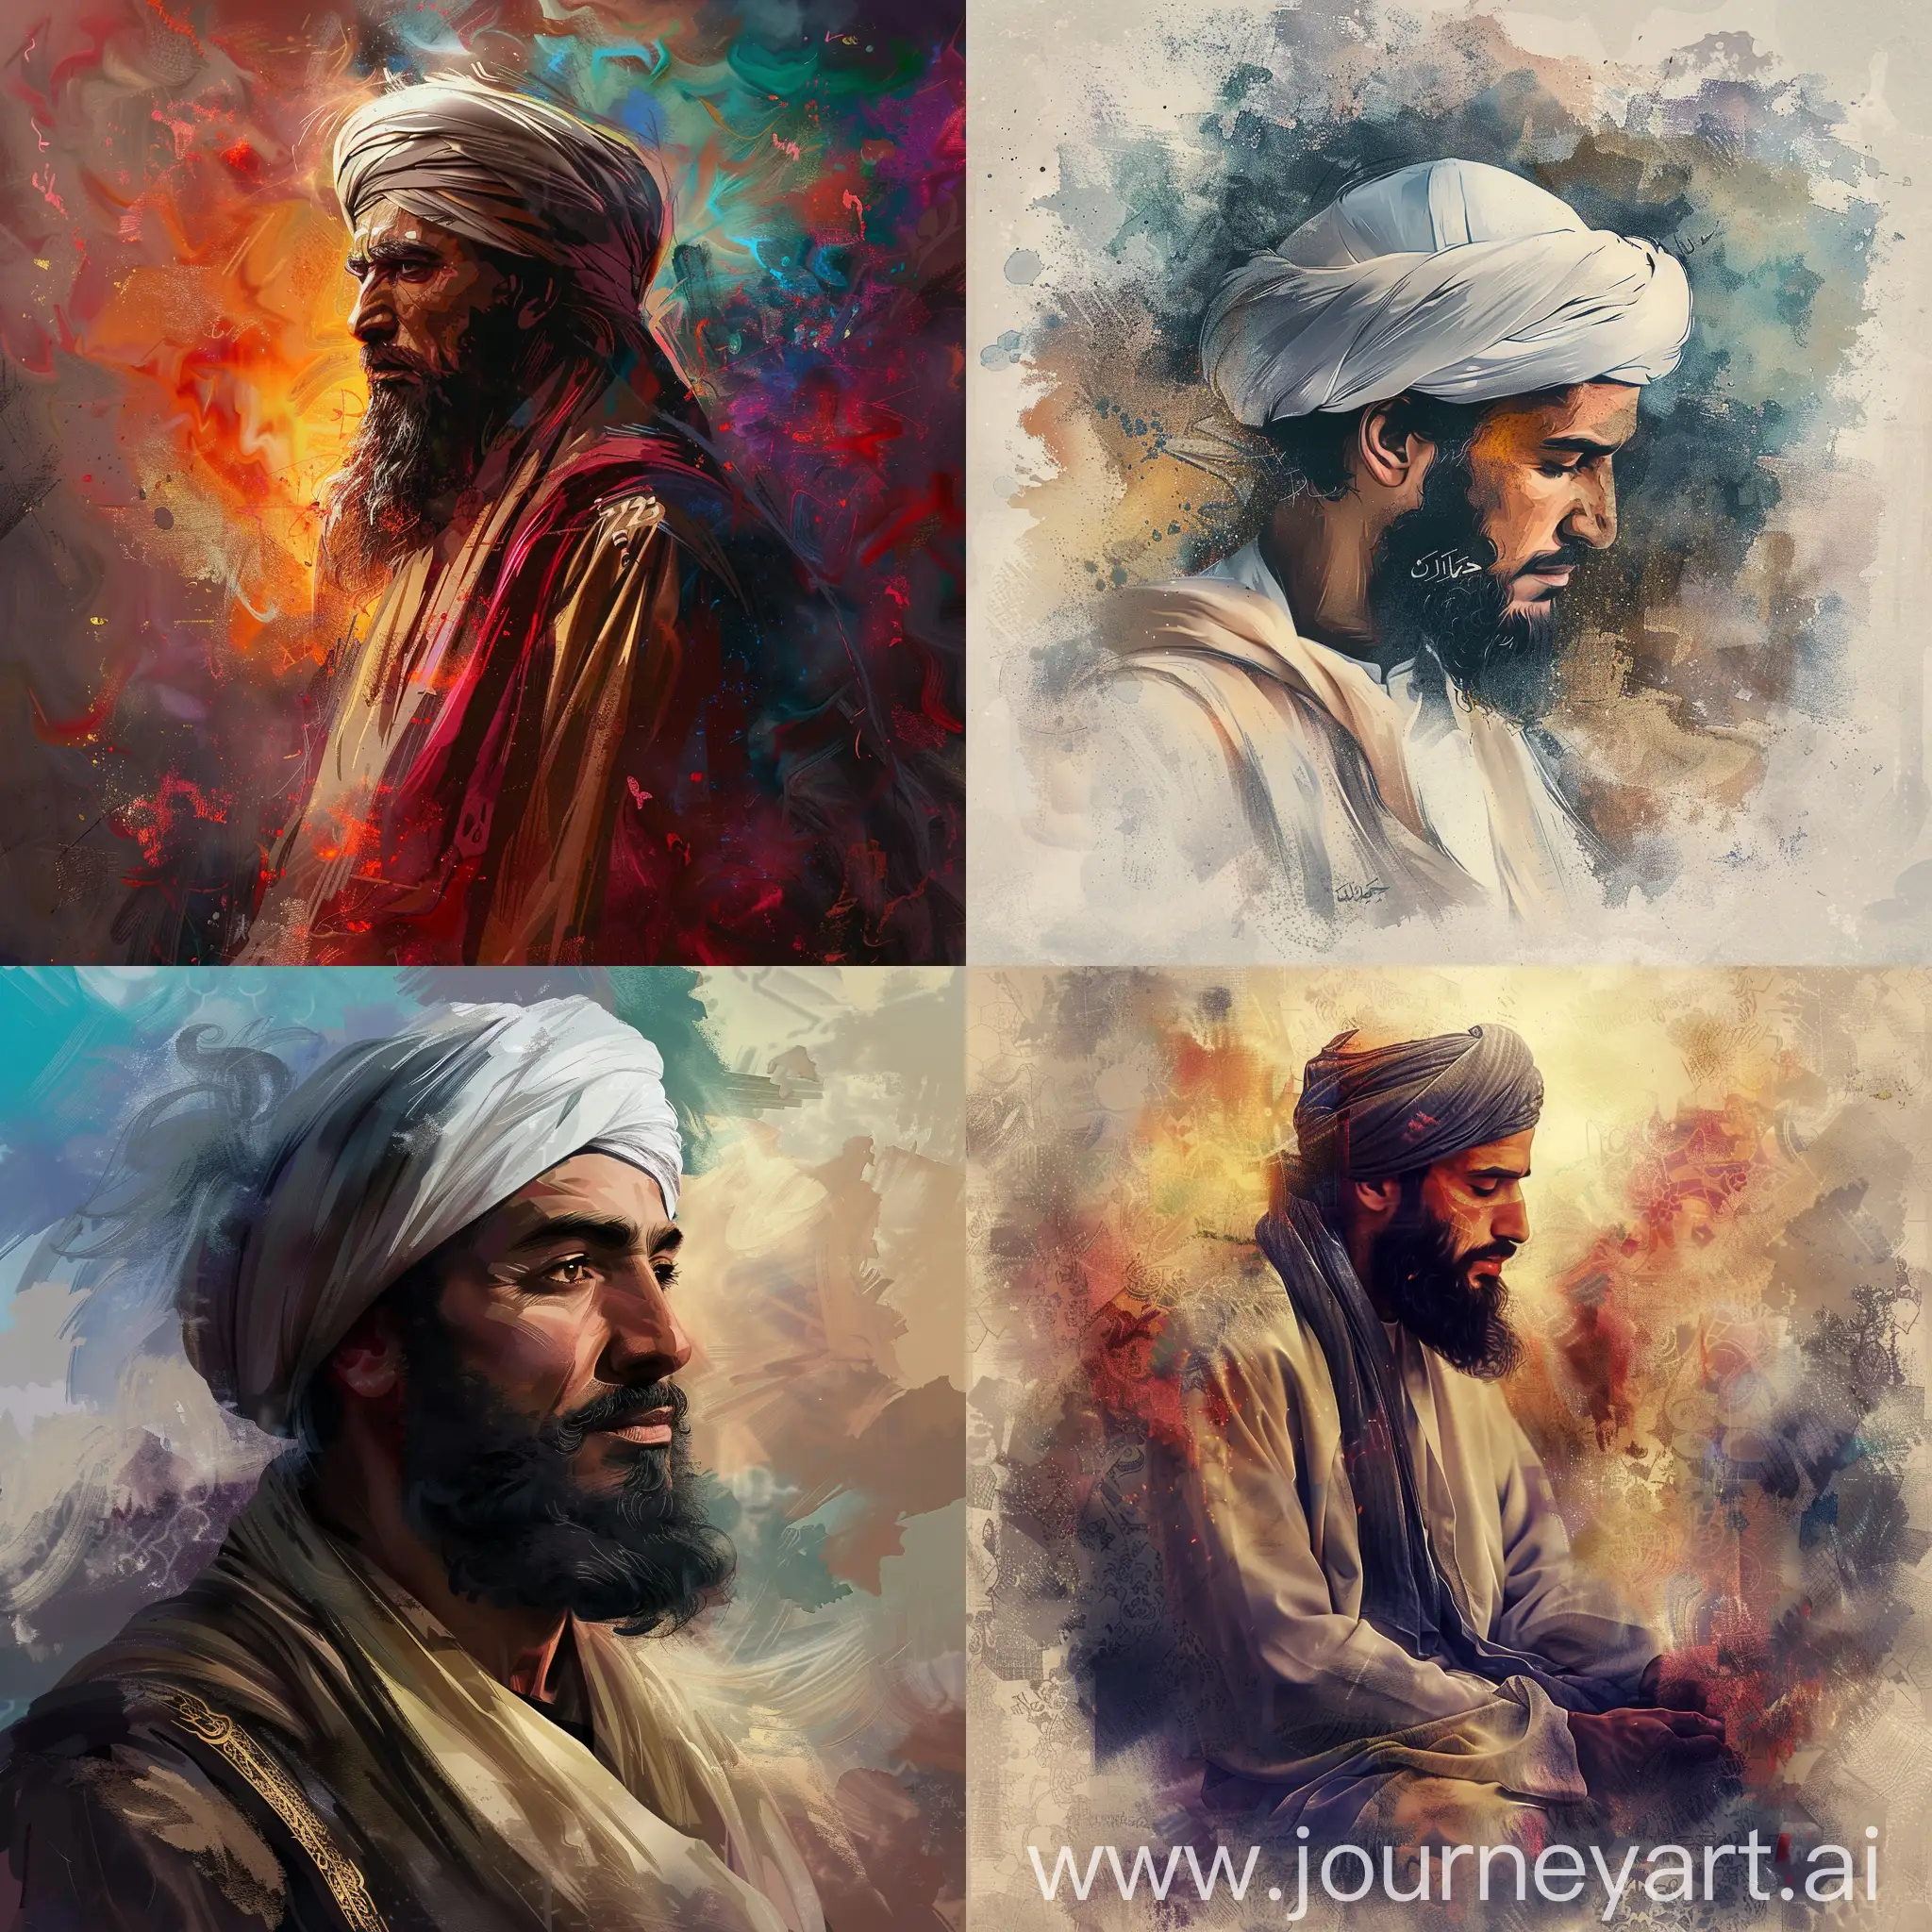 create an image about the prophet muhammed names in a digital painting style